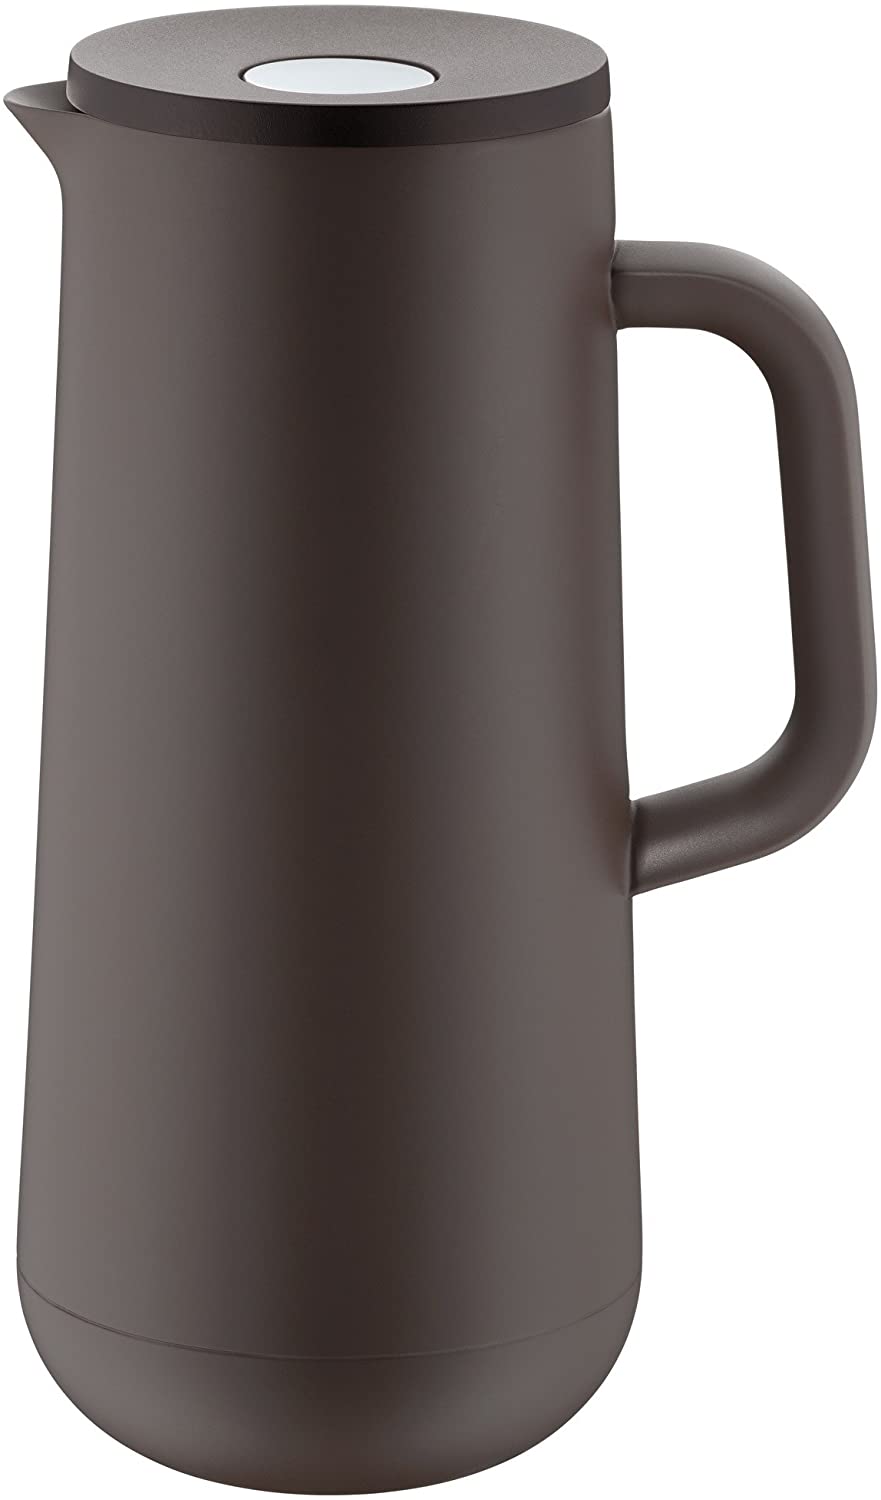 WMF Impulse thermos jug 1l, vacuum jug for coffee or tea, pressure lock, keeps drinks cold & warm for 24 hours, taupe